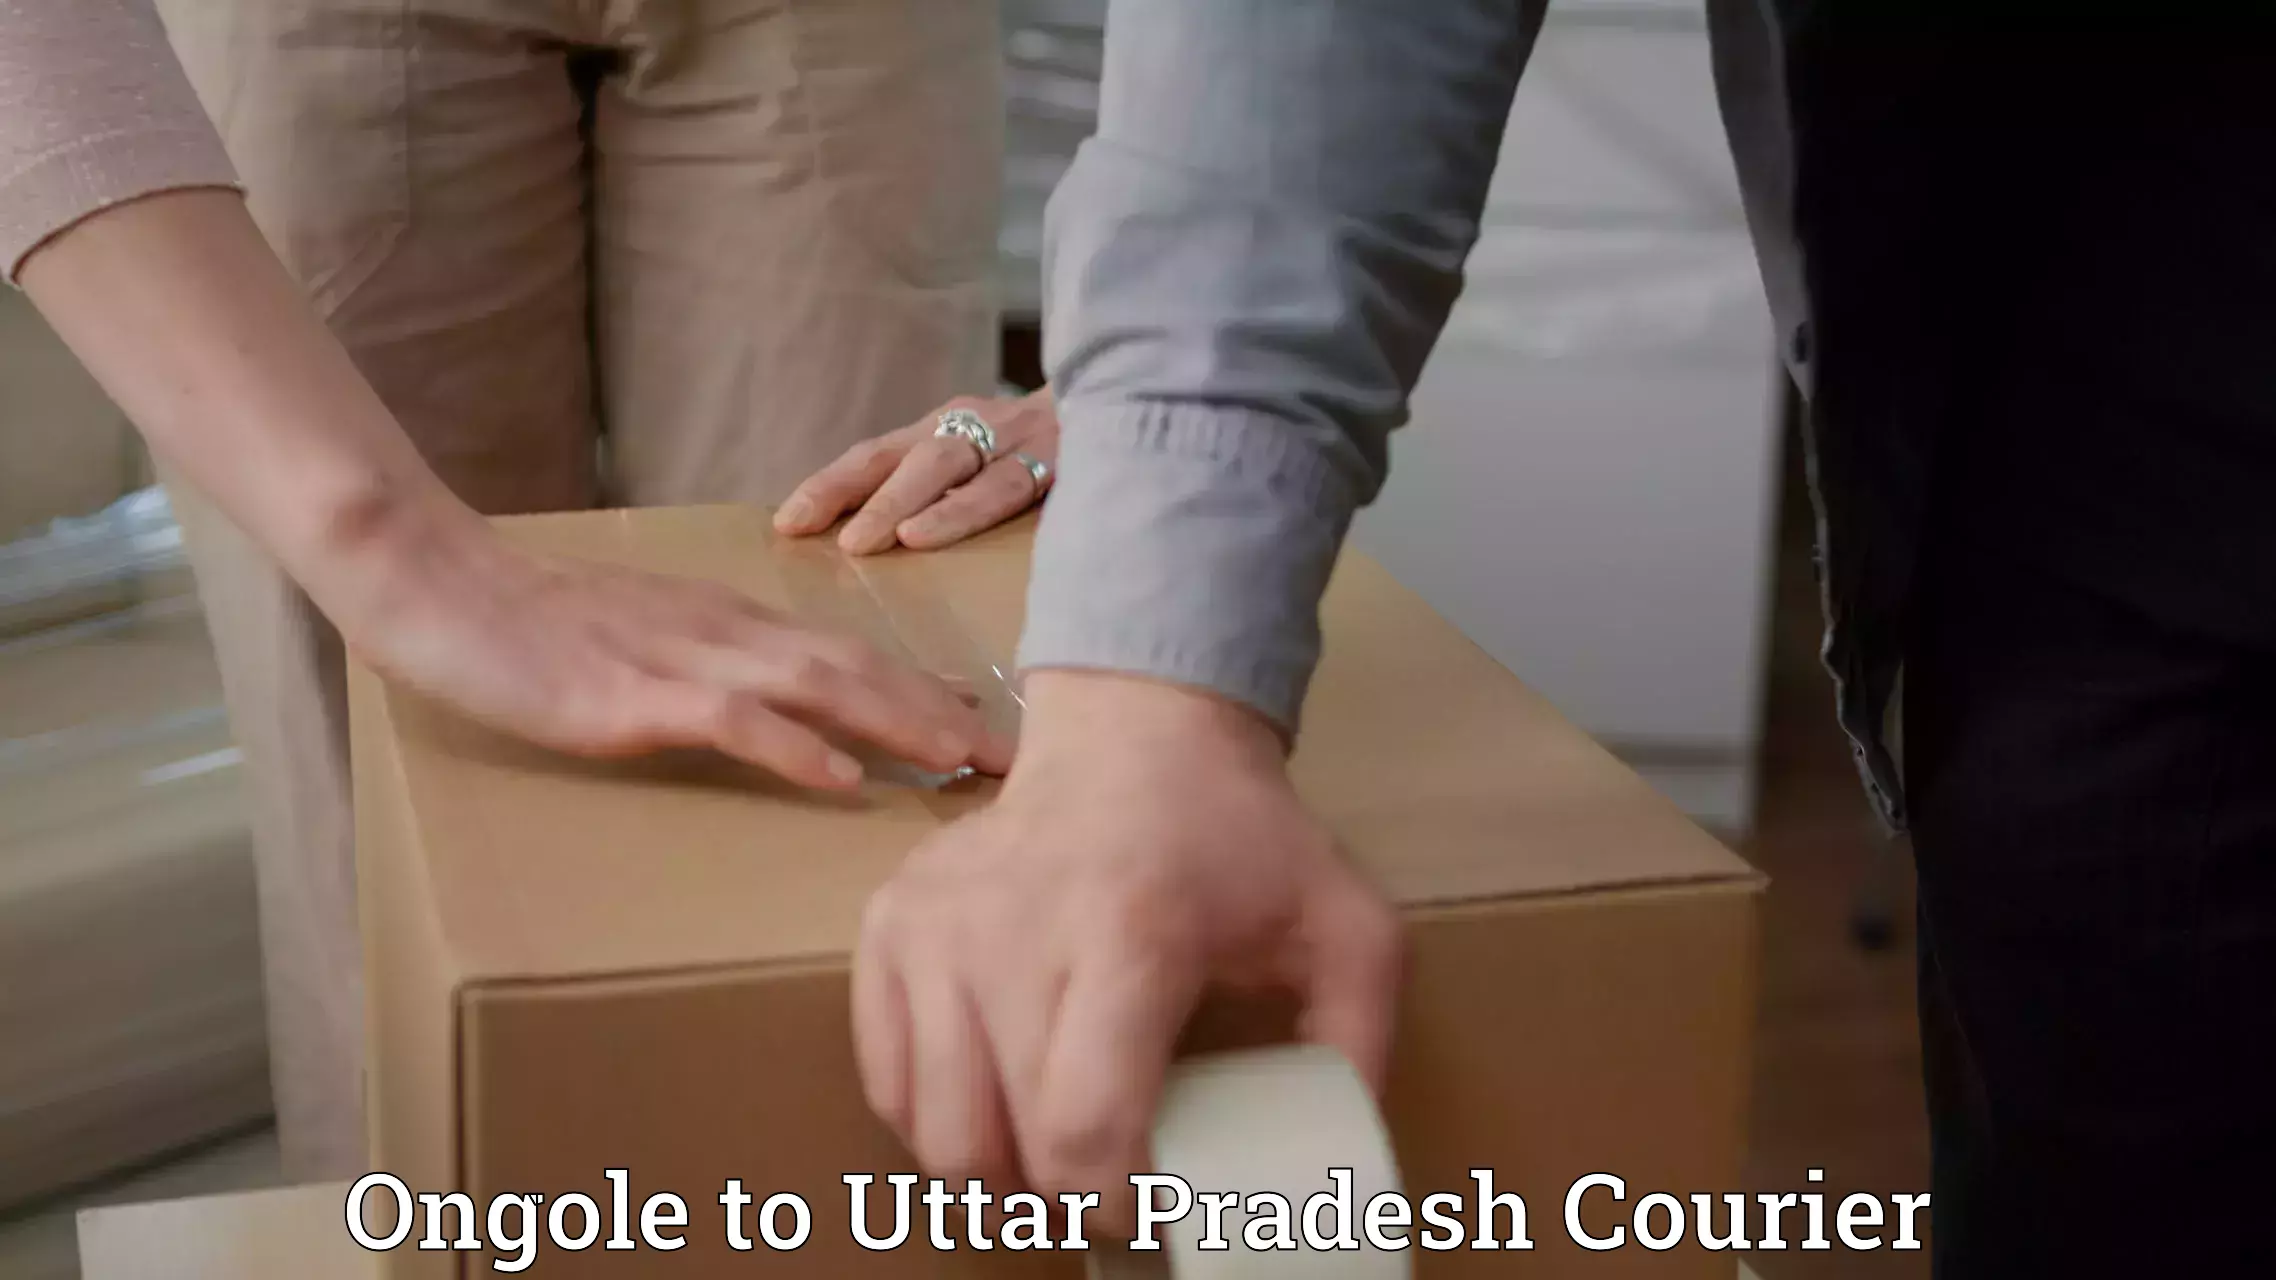 User-friendly delivery service Ongole to Uttar Pradesh